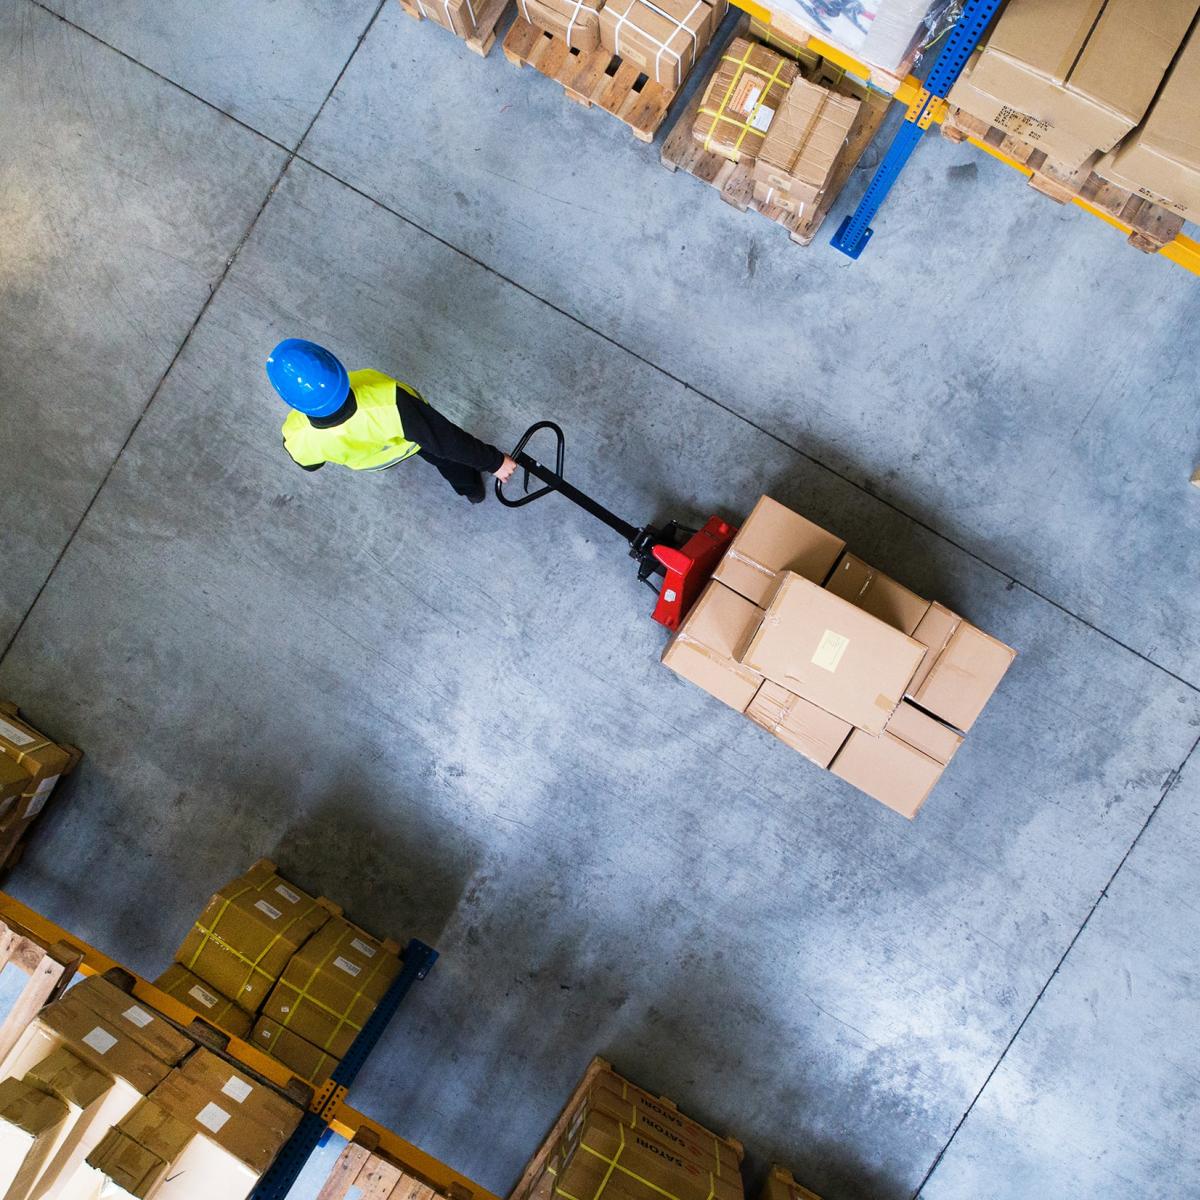 3rd party warehousing and order fulfilment services | Kendal, Cumbria